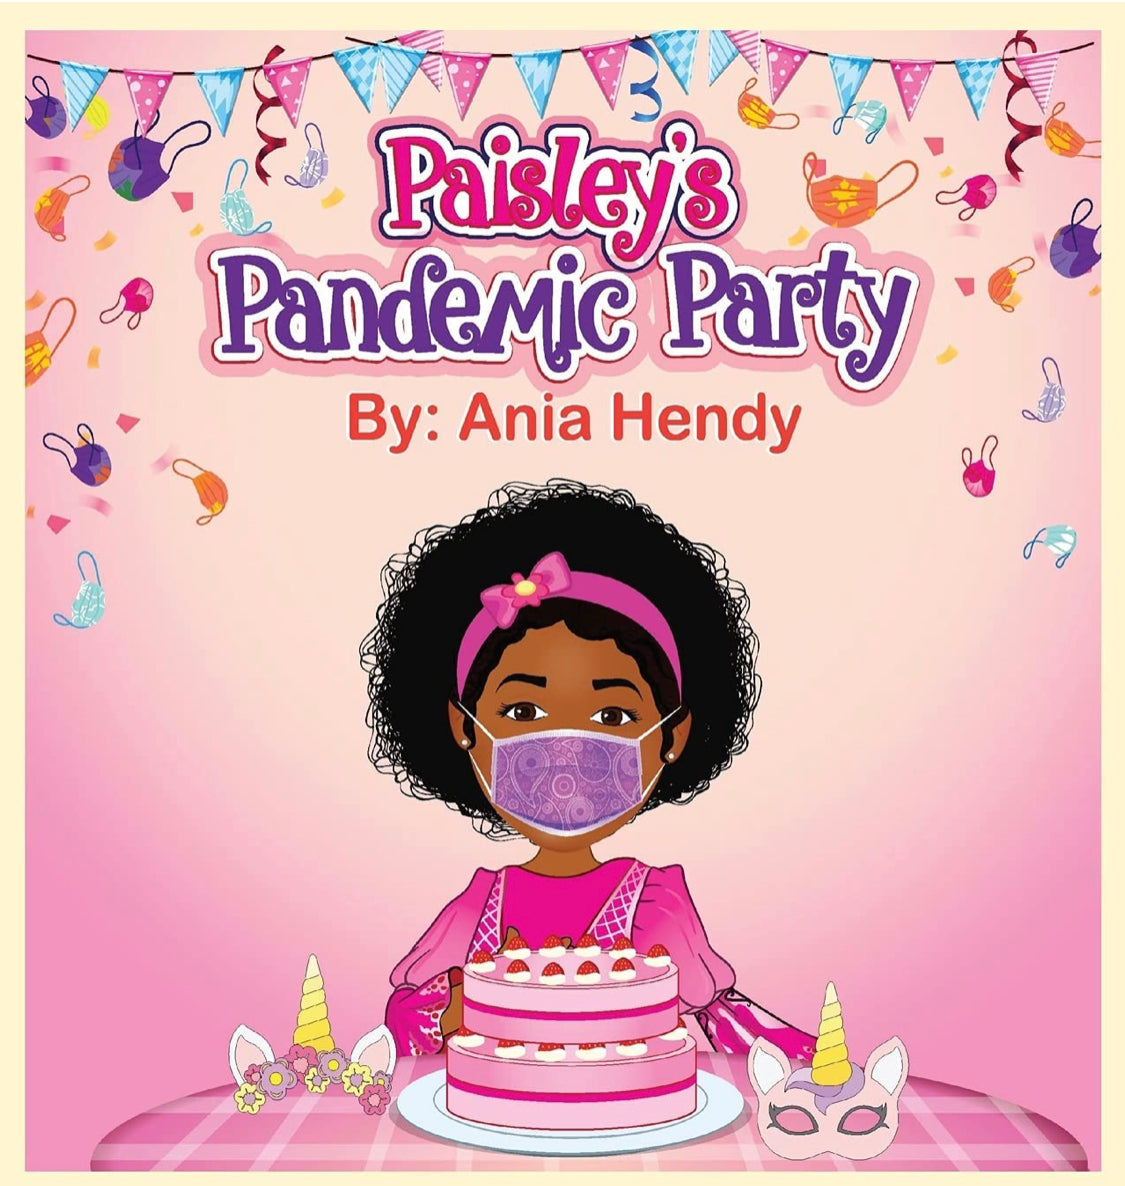 Paisley’s pandemic party